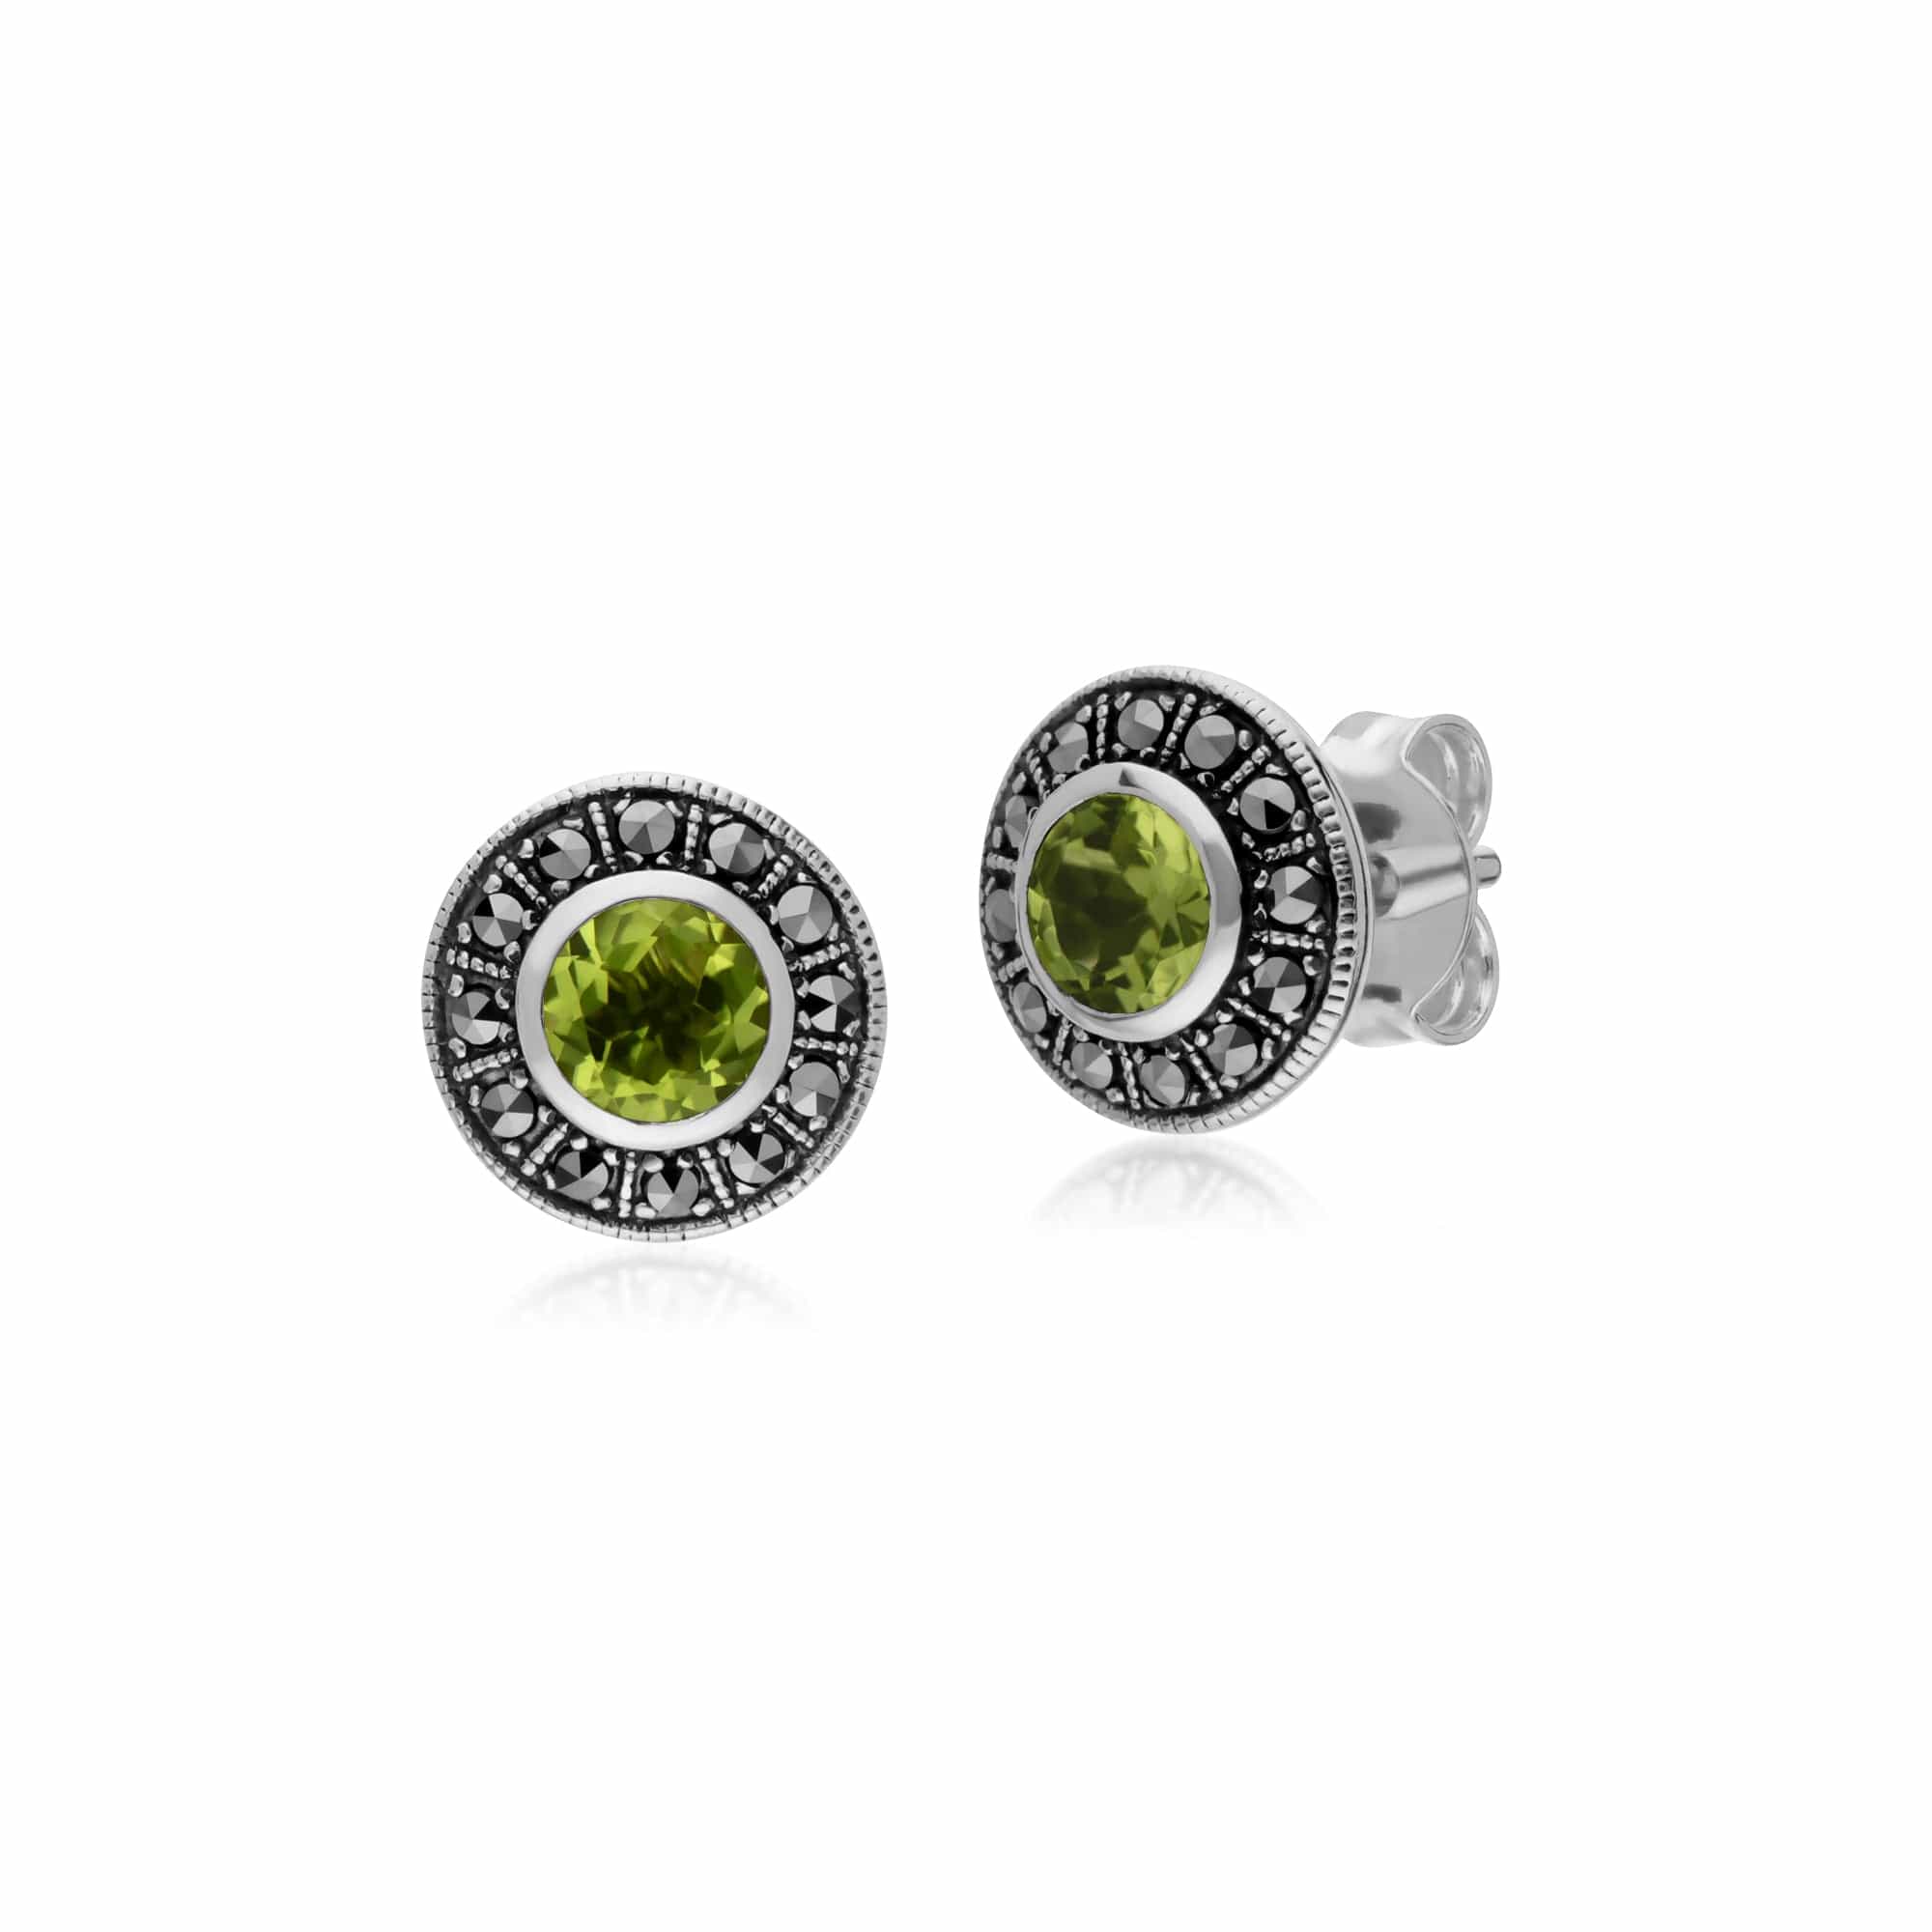 214E872704925-214R605604925 Art Deco Style Round Peridot and Marcasite Cluster Stud Earrings & Ring Set in 925 Sterling Silver 2